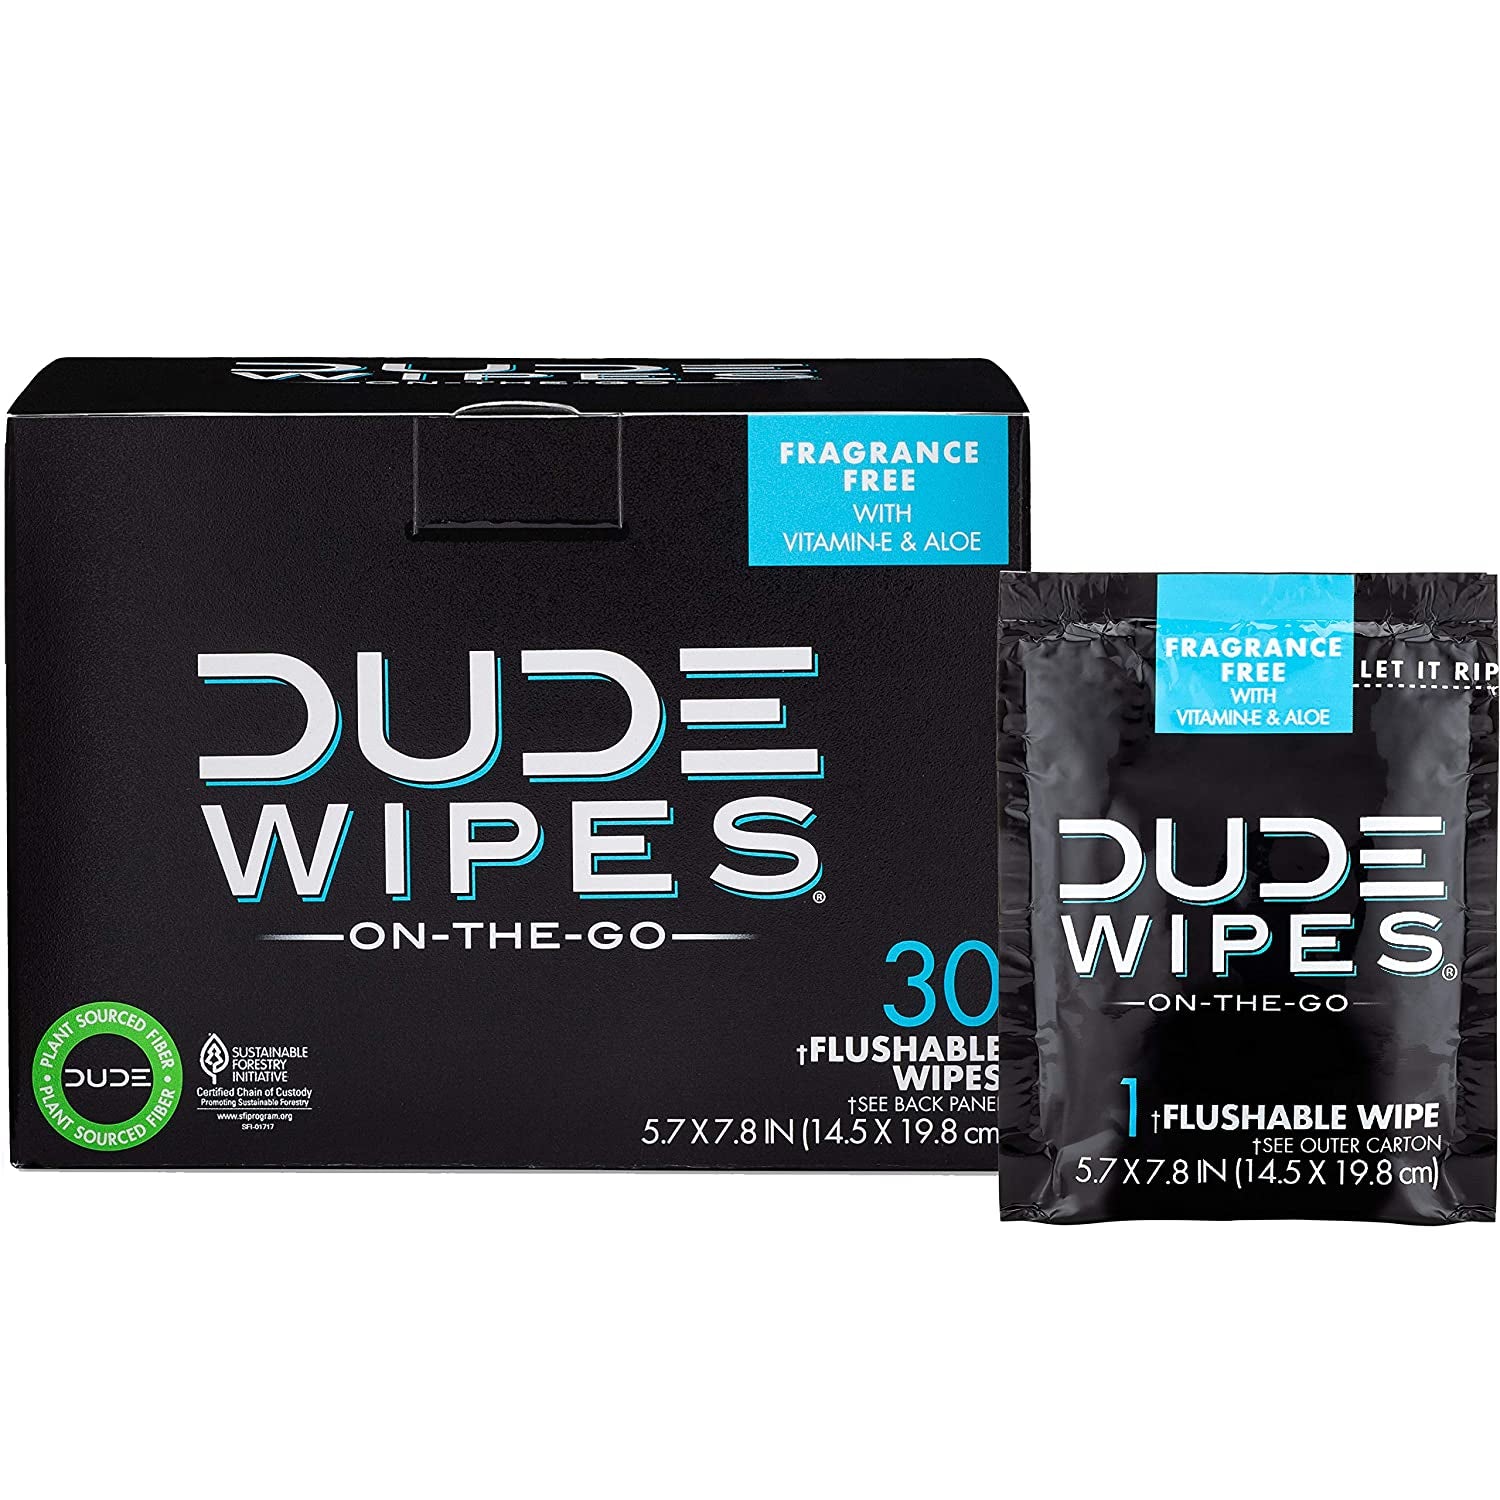 DUDE Wipes - On-The-Go Flushable Wipes - 1 Pack, 30 Wipes - Unscented Extra-Large Individually Wrapped Adult Wet Wipes - Vitamin E & Aloe - Septic and Sewer Safe